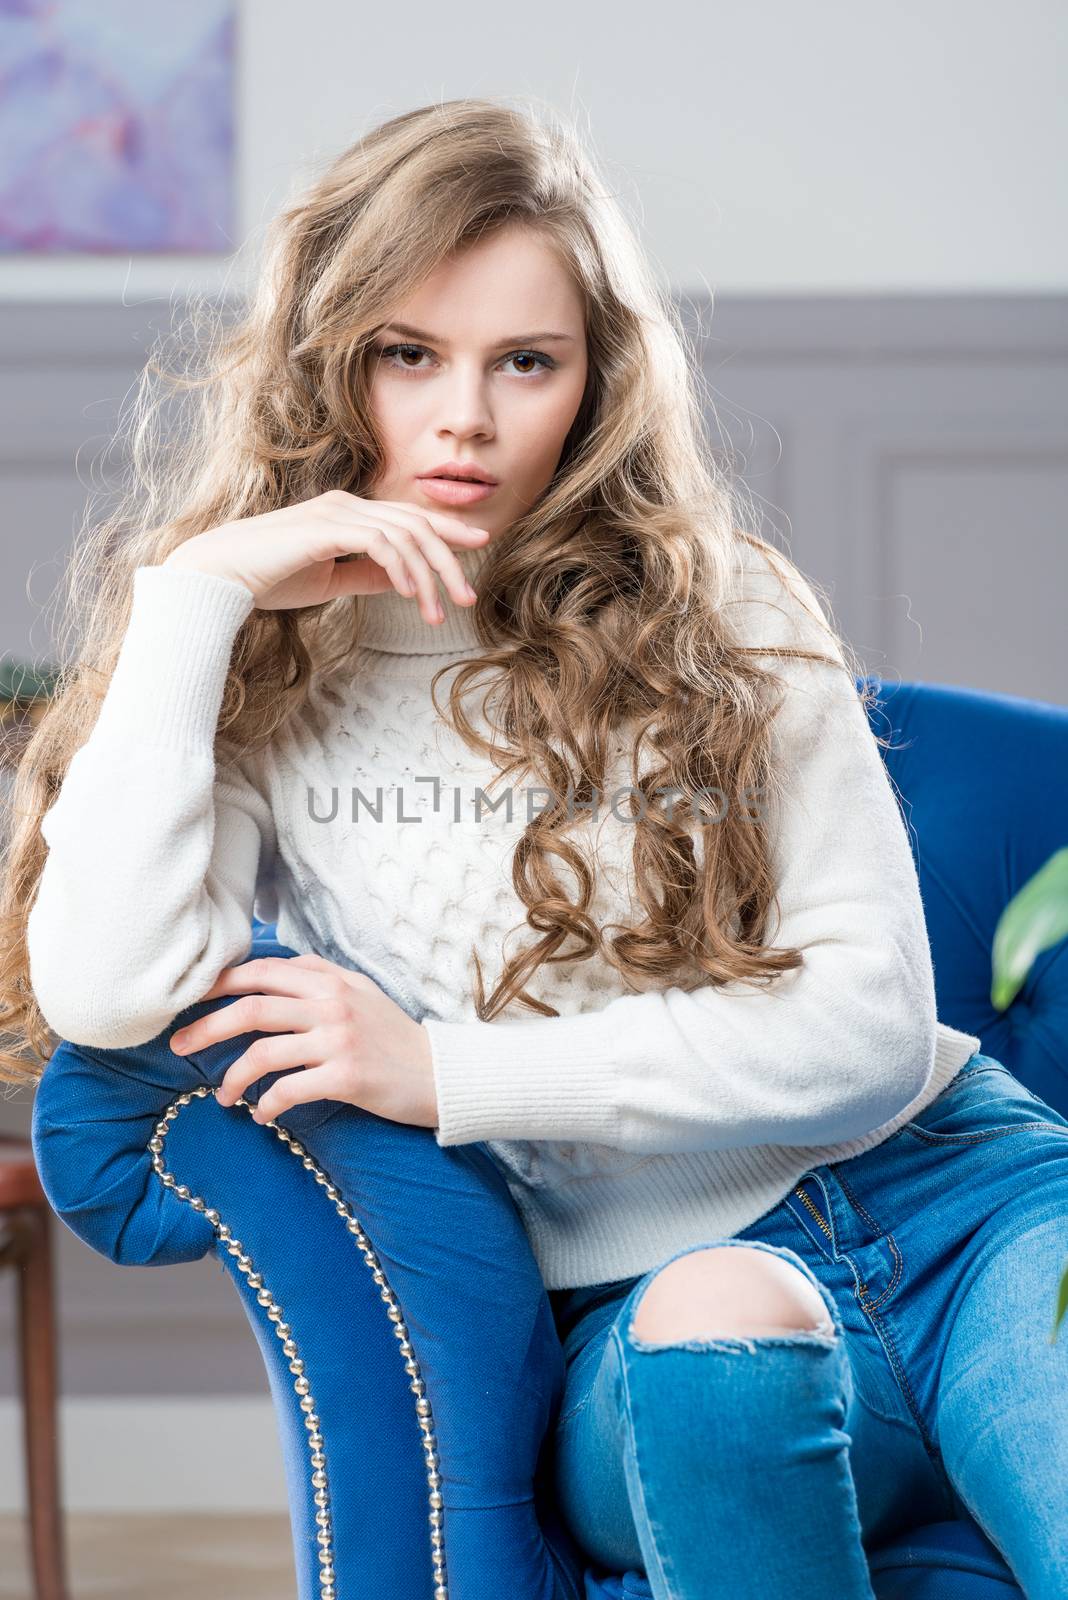 charming girl sitting in living room on blue couch and posing